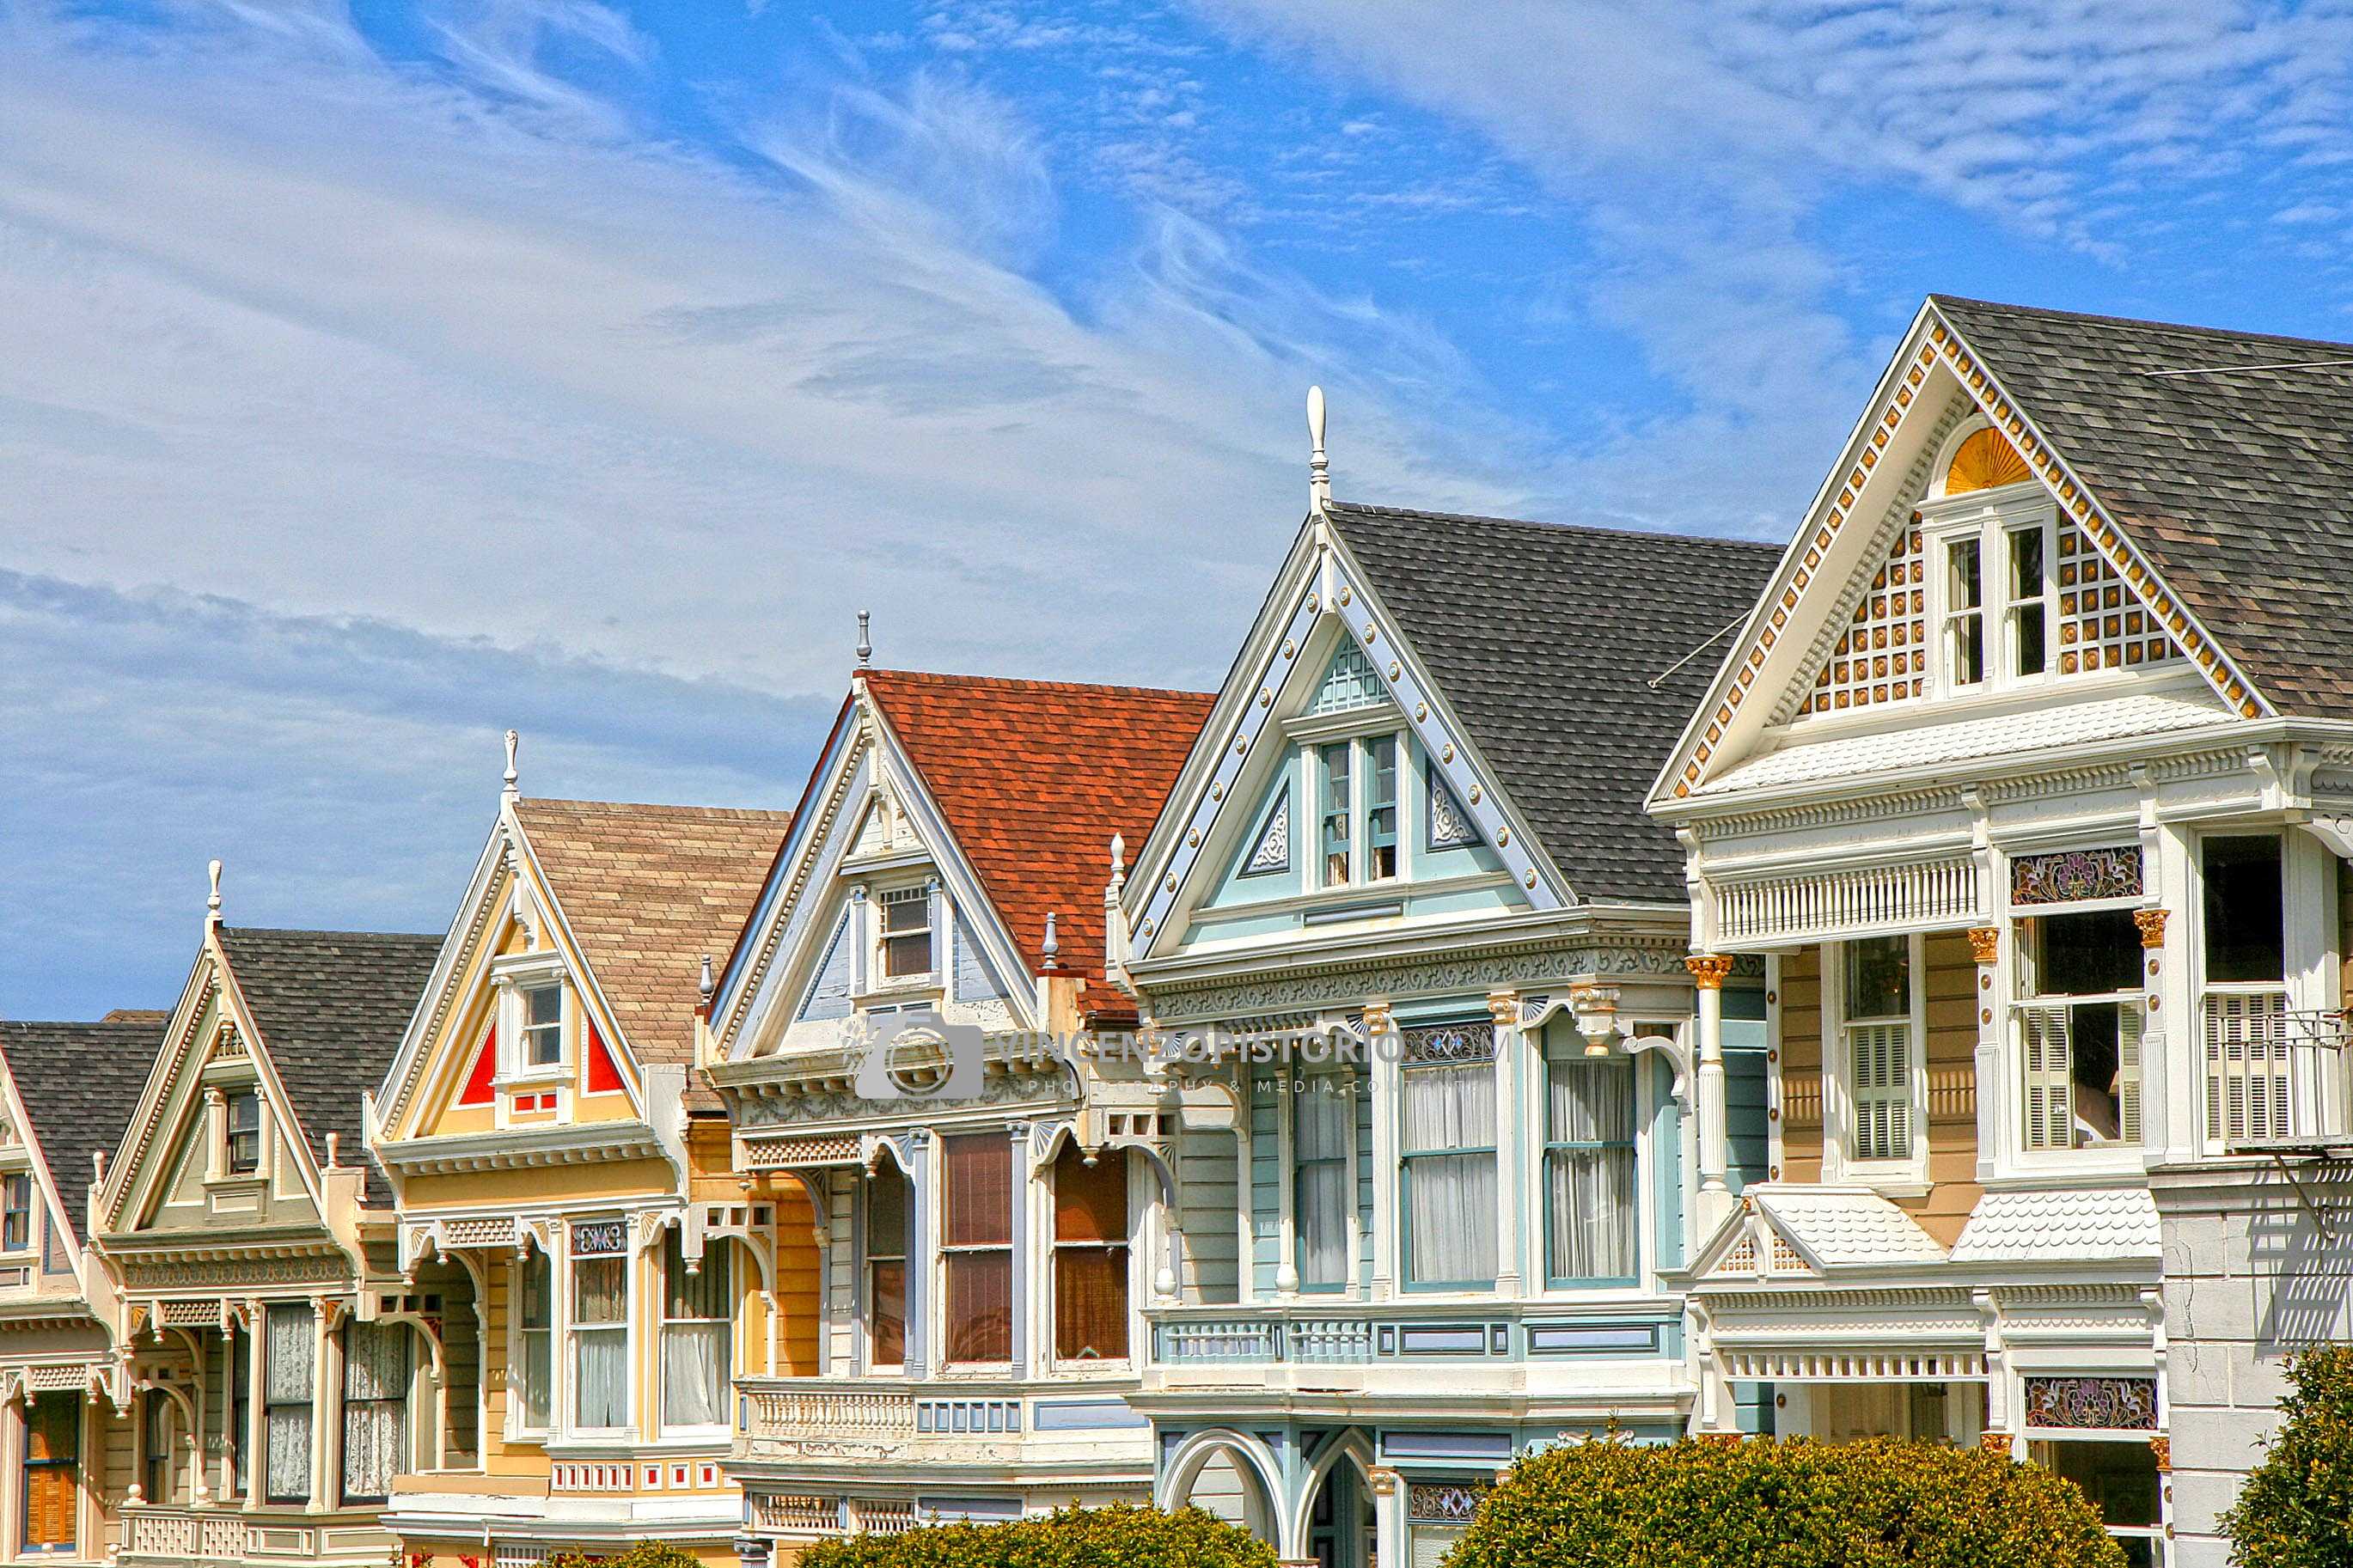 View of the Painted Ladies at Alamo Square